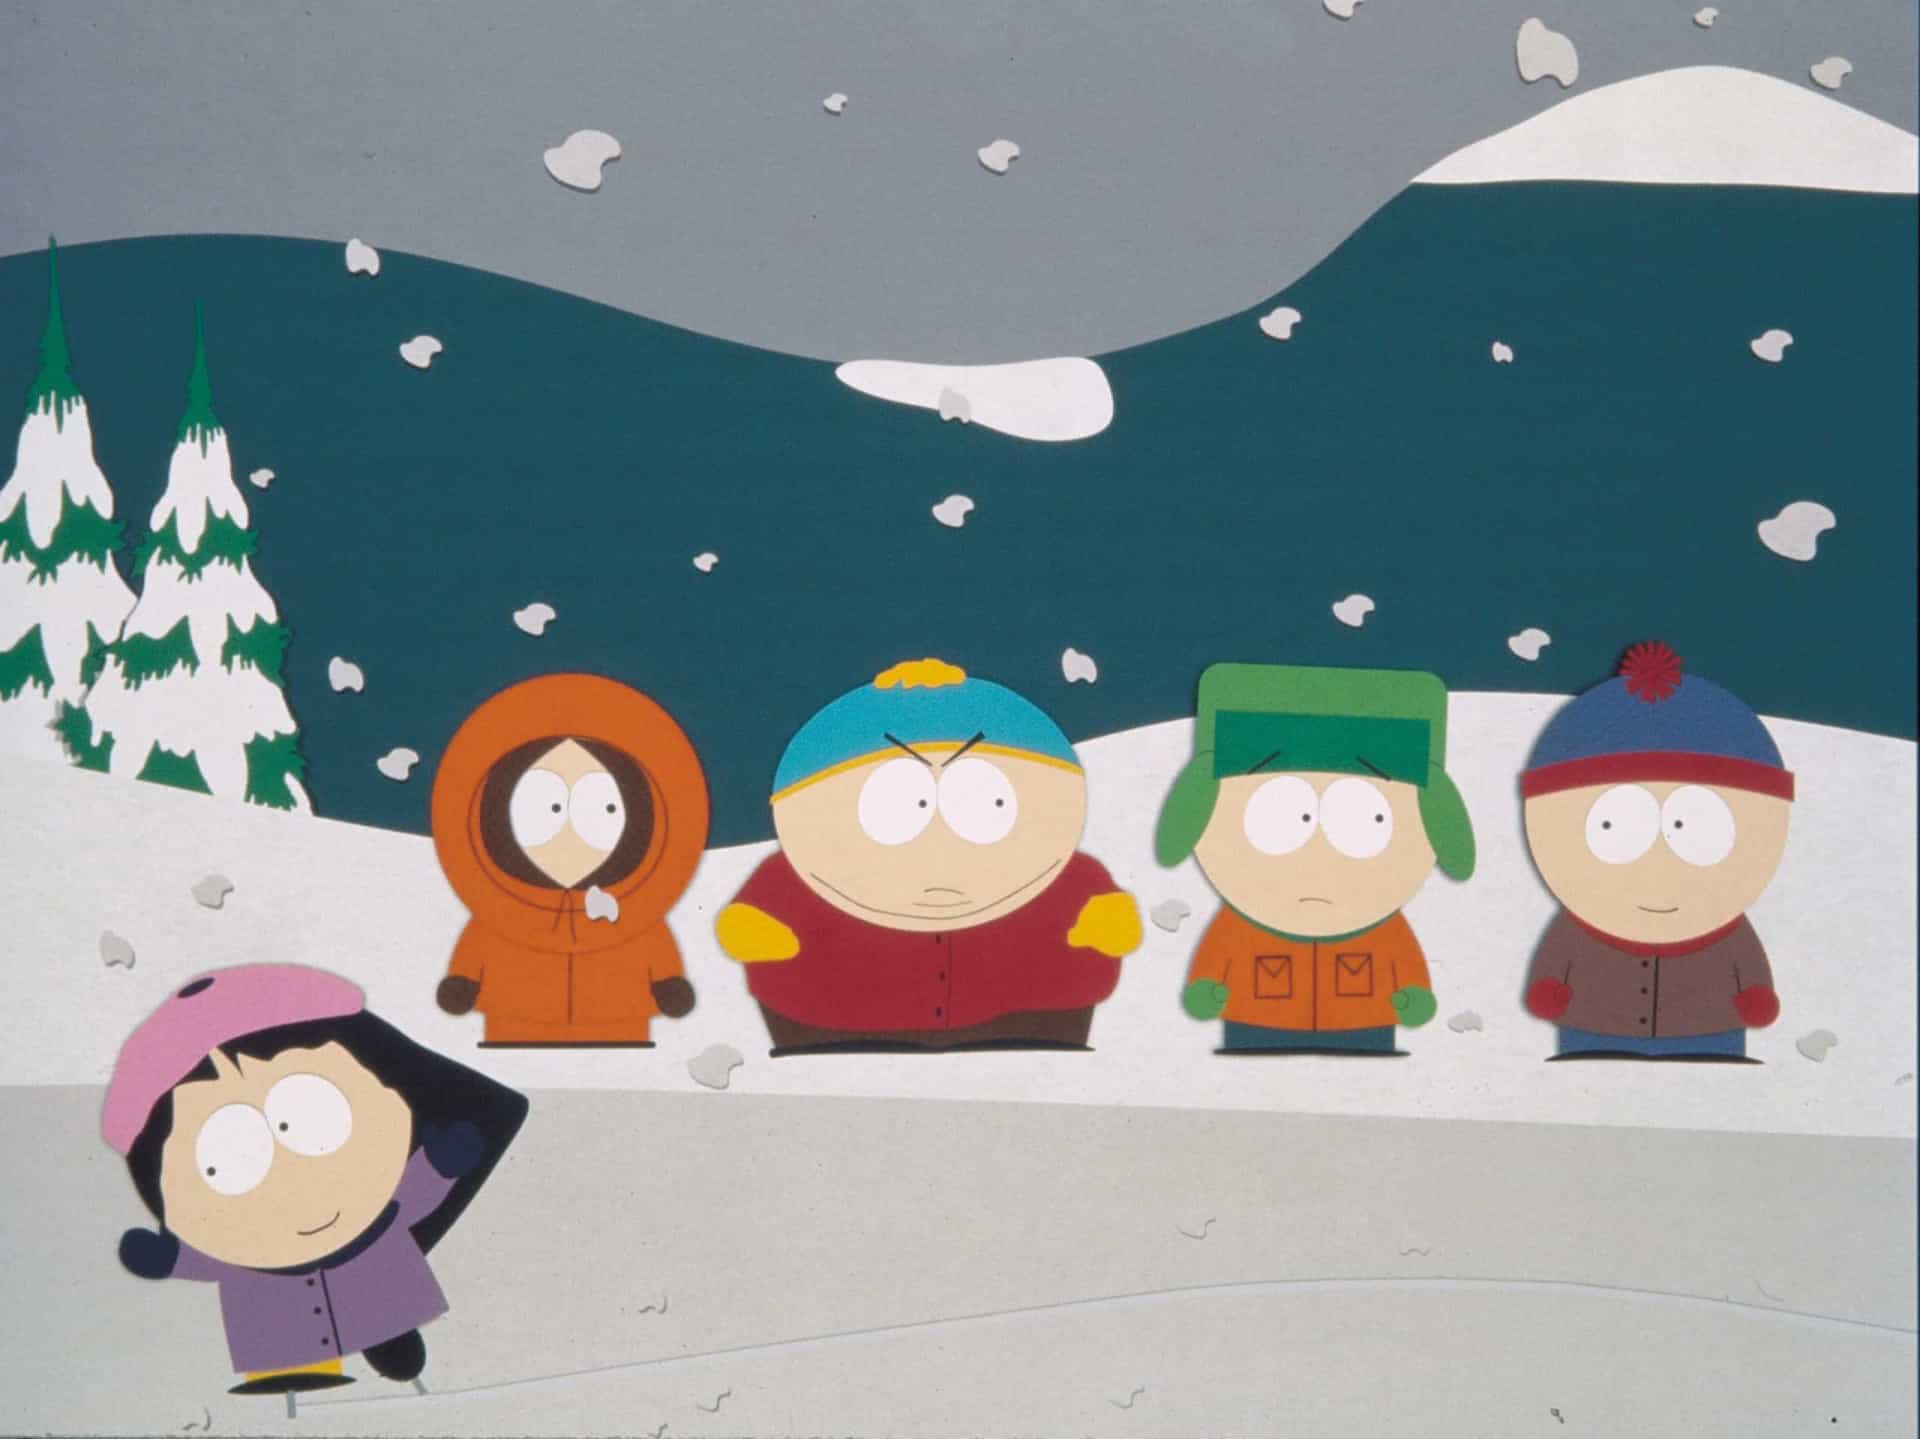 <p>Located in Colorado, South Park won't guarantee a good school system, but it will sure be a lot of fun with local kids Stan, Kyle, Kenny, and Cartman.</p>